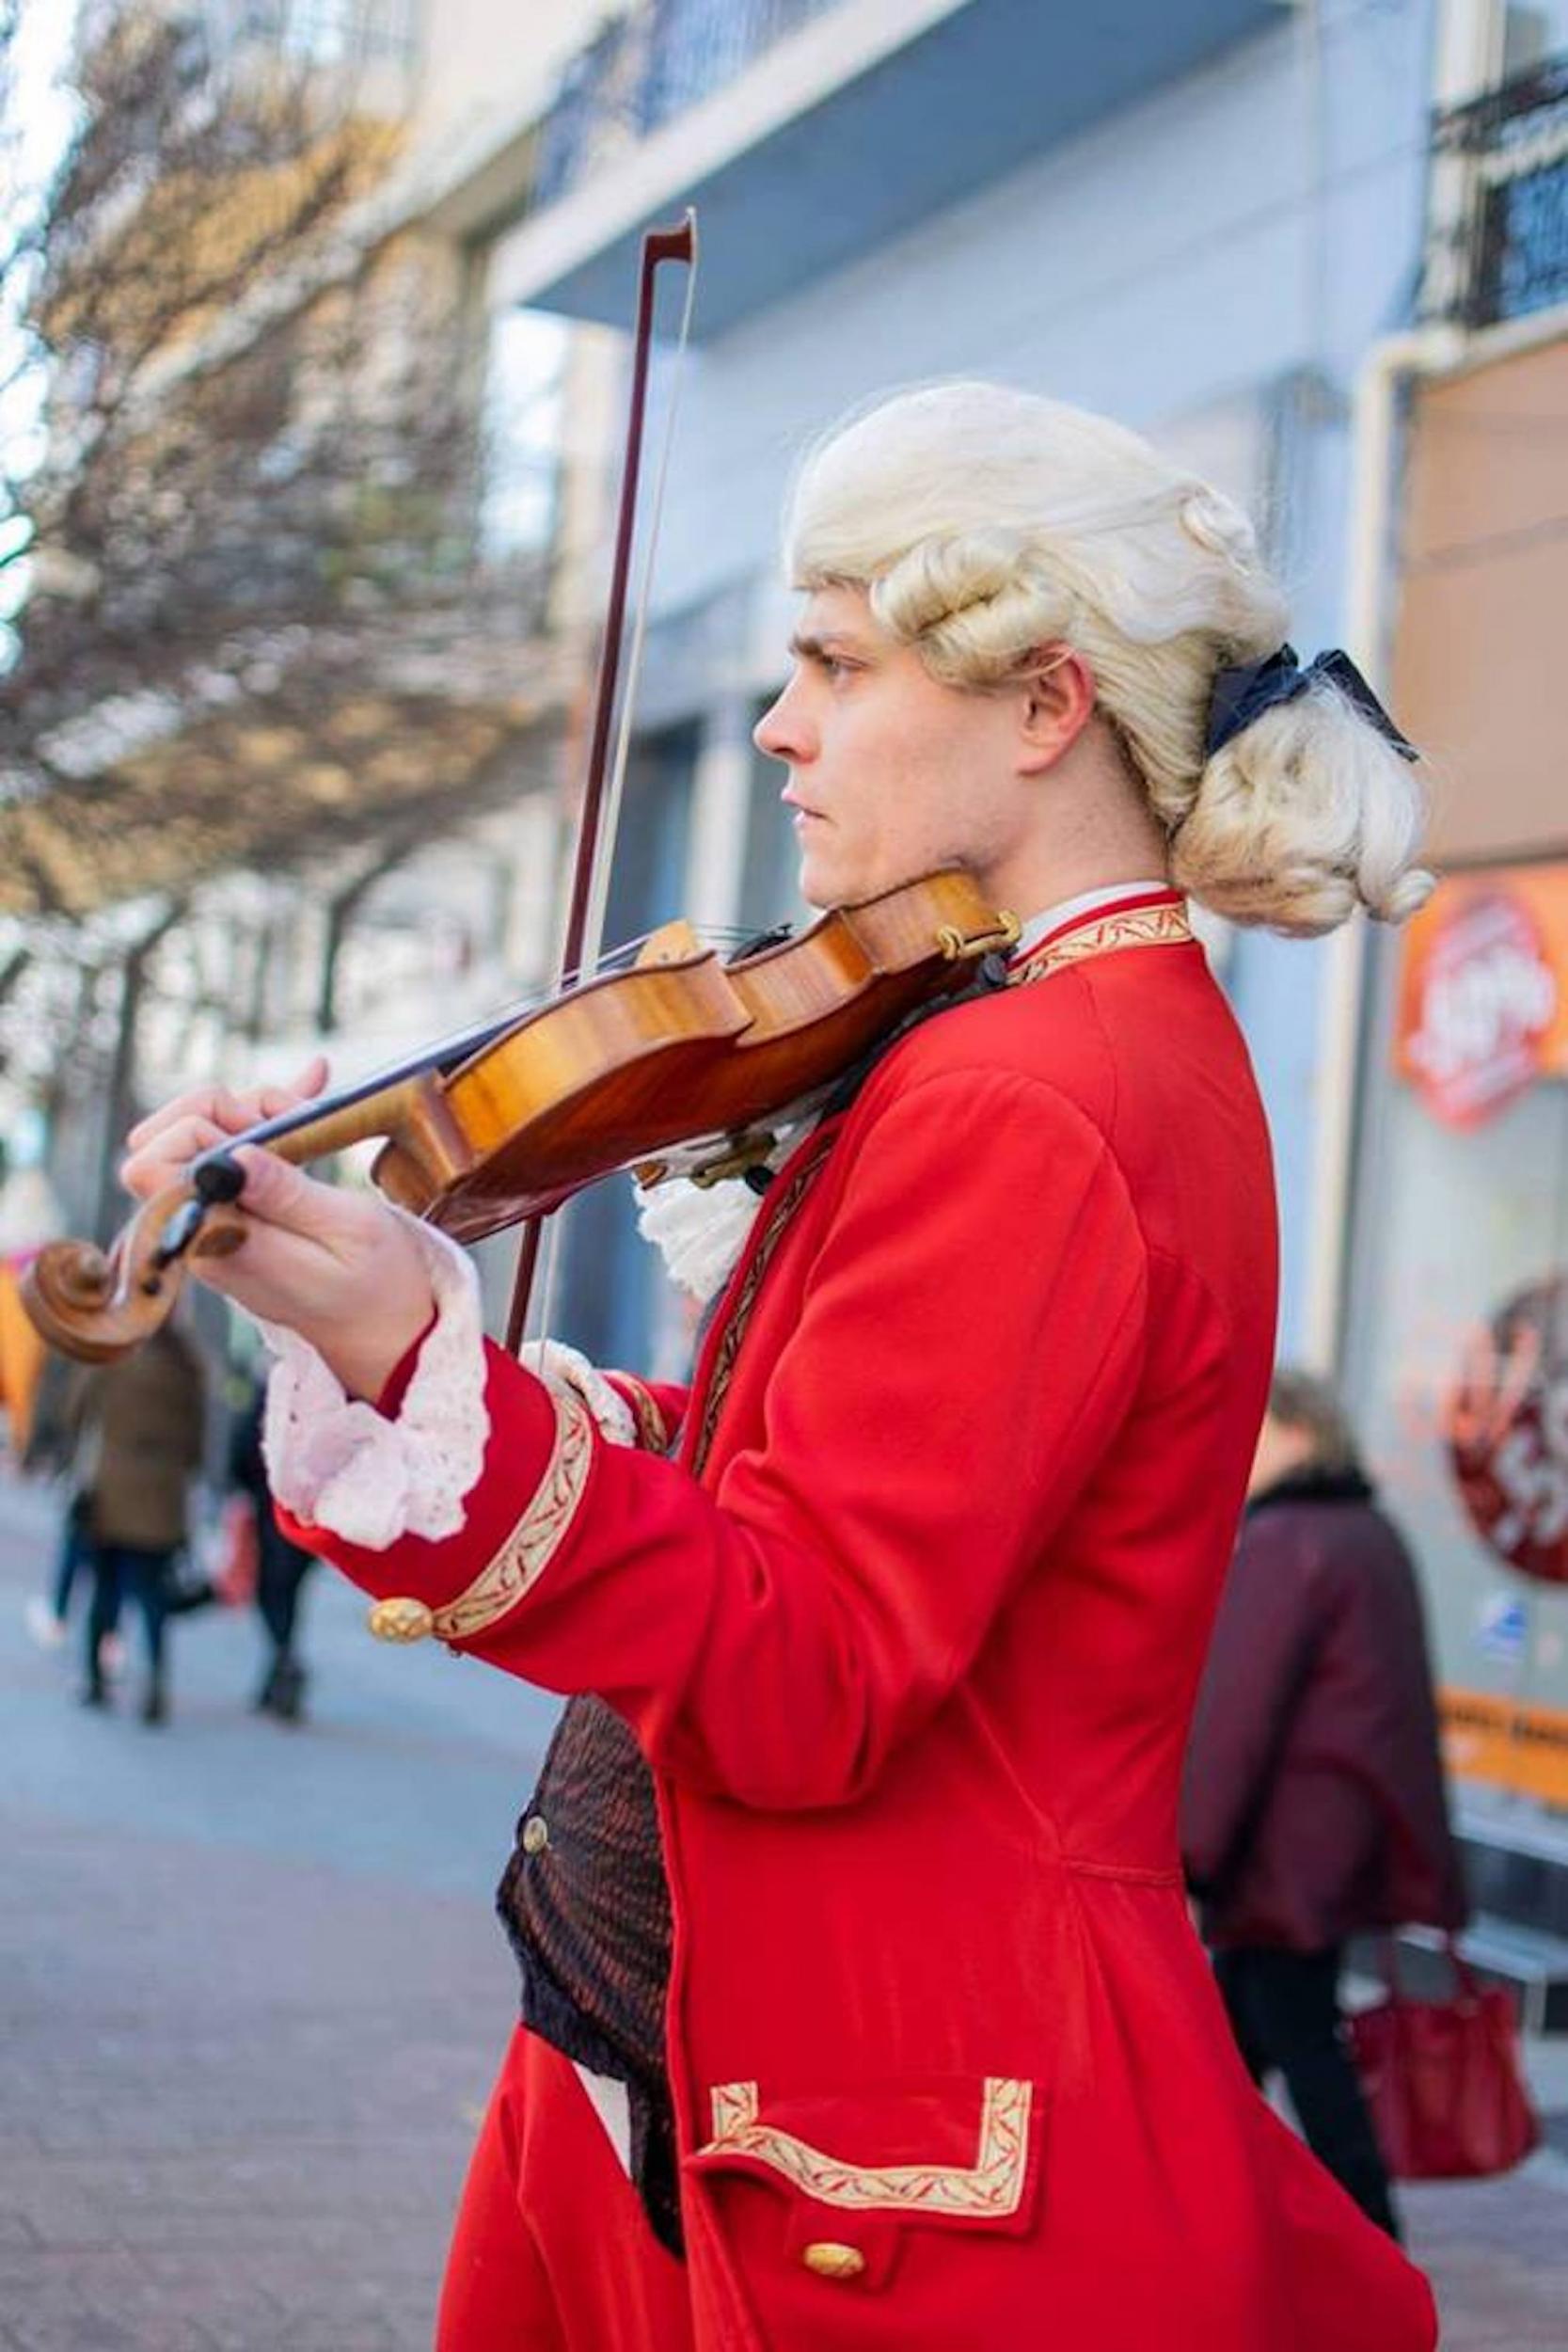 Georgi Dimitroff quit his job at the state orchestra to play violin on the streets of Plovdiv